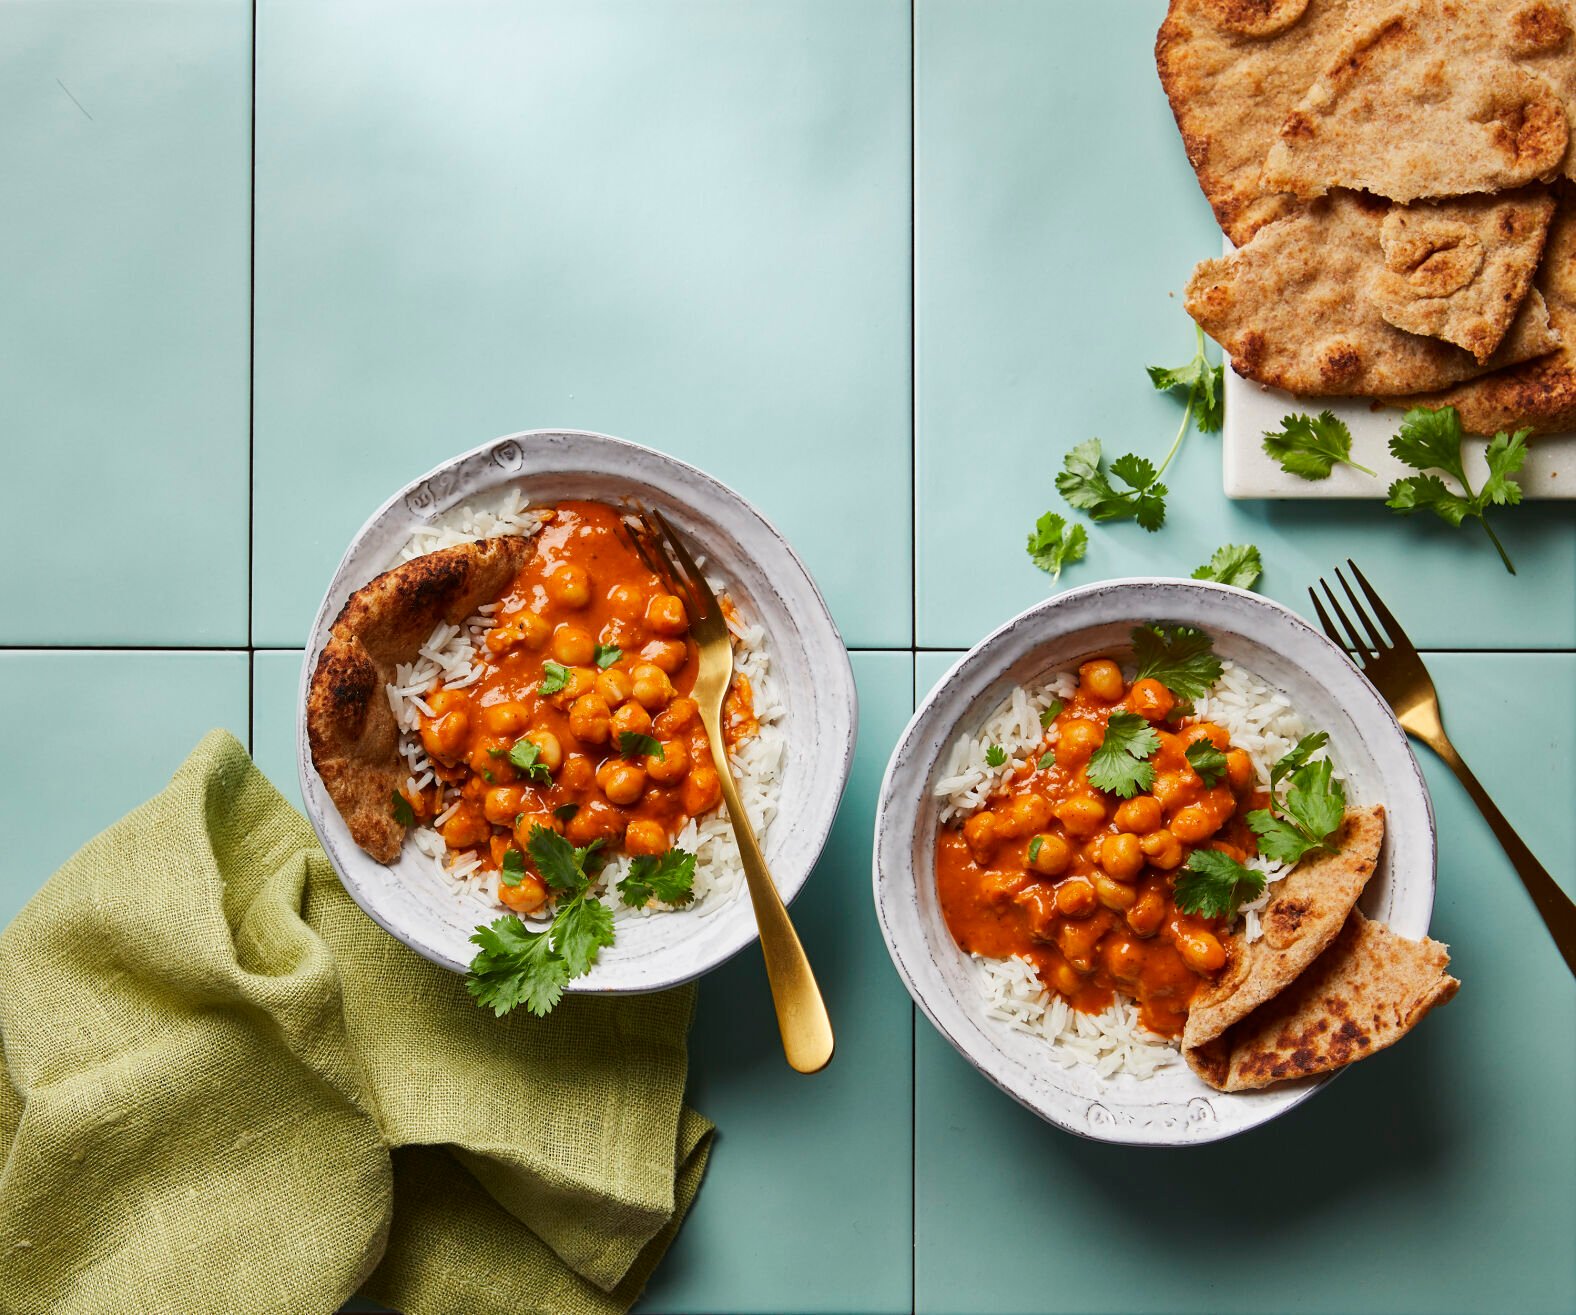 EatingWell This vegan curry is packed with flavor